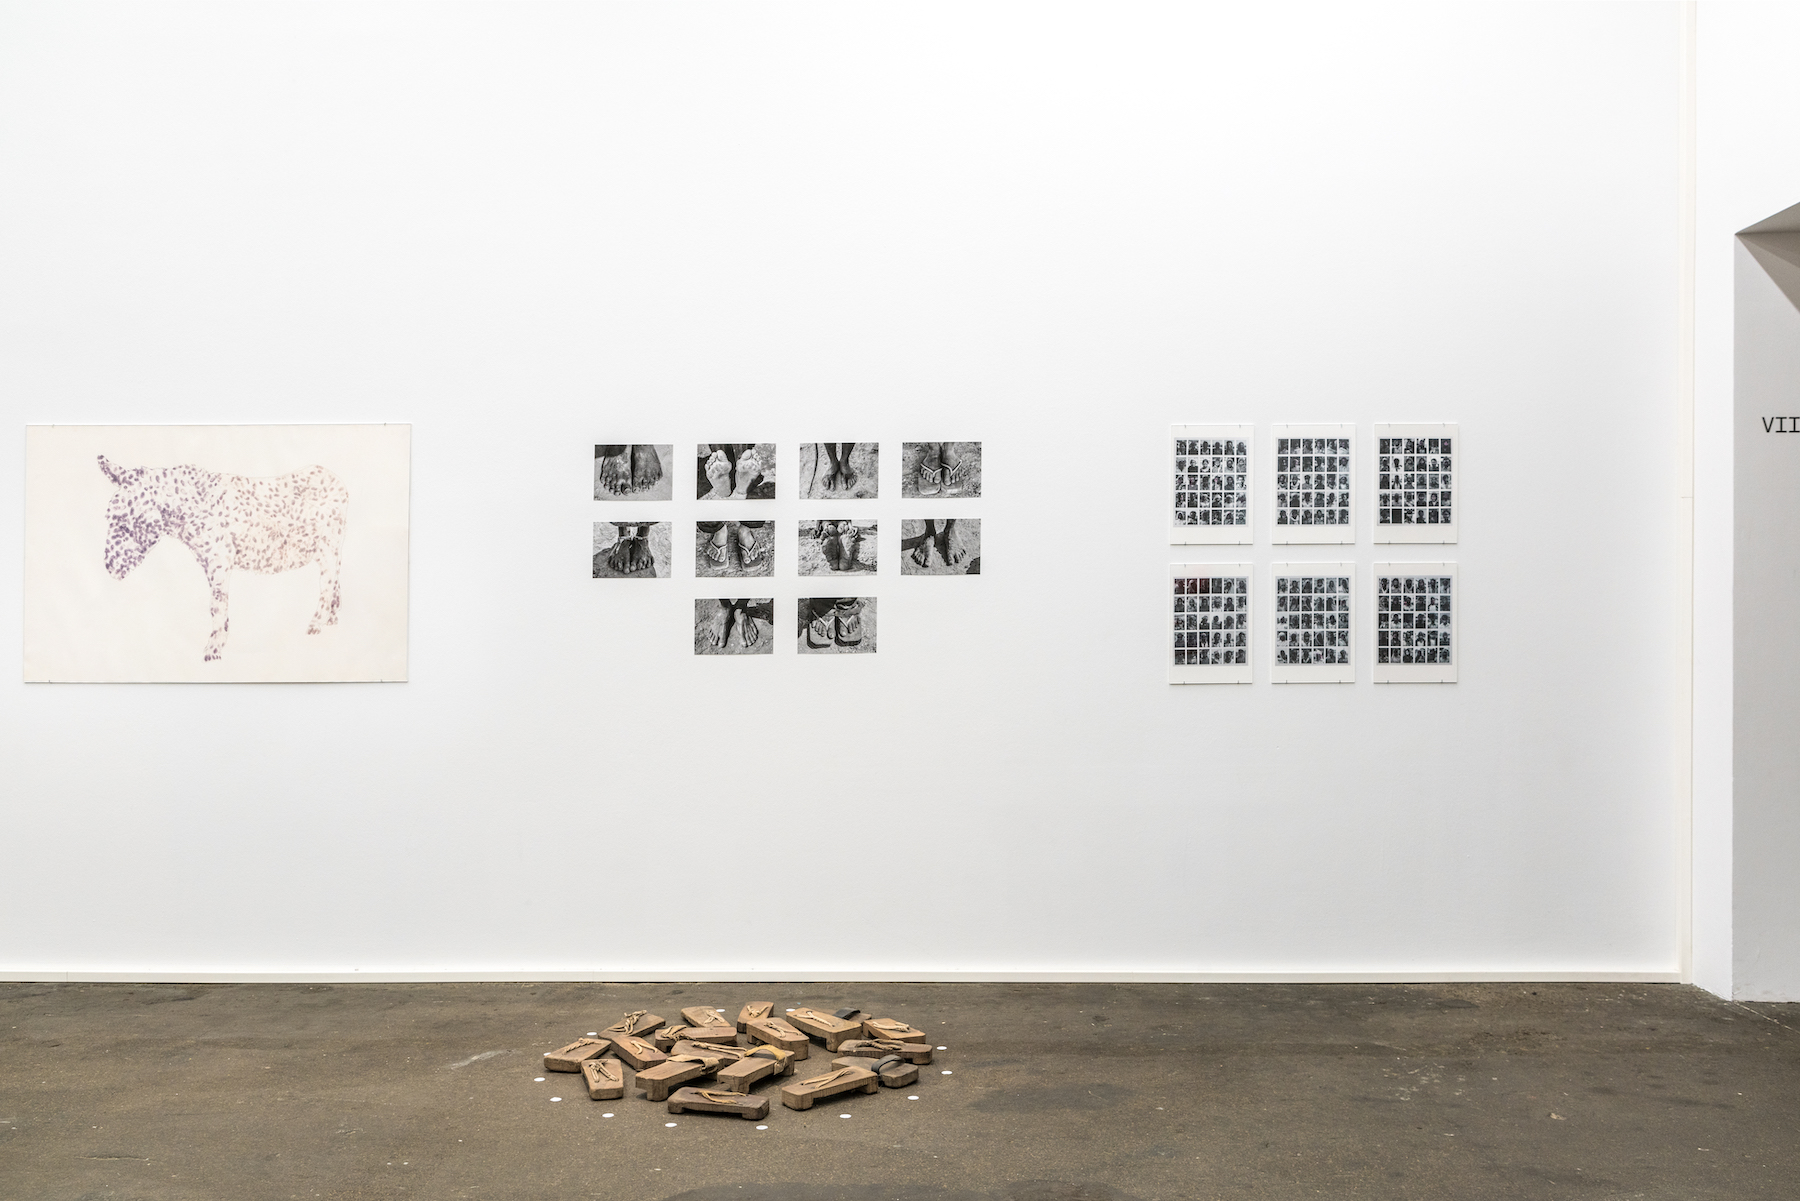 From left to right, a donkey, ten groupings of photos of feet, and six different groups of smaller black and white images are displayed on the wall. On the floor in the middle, a circle of rectangular wooden sandals are displayed.